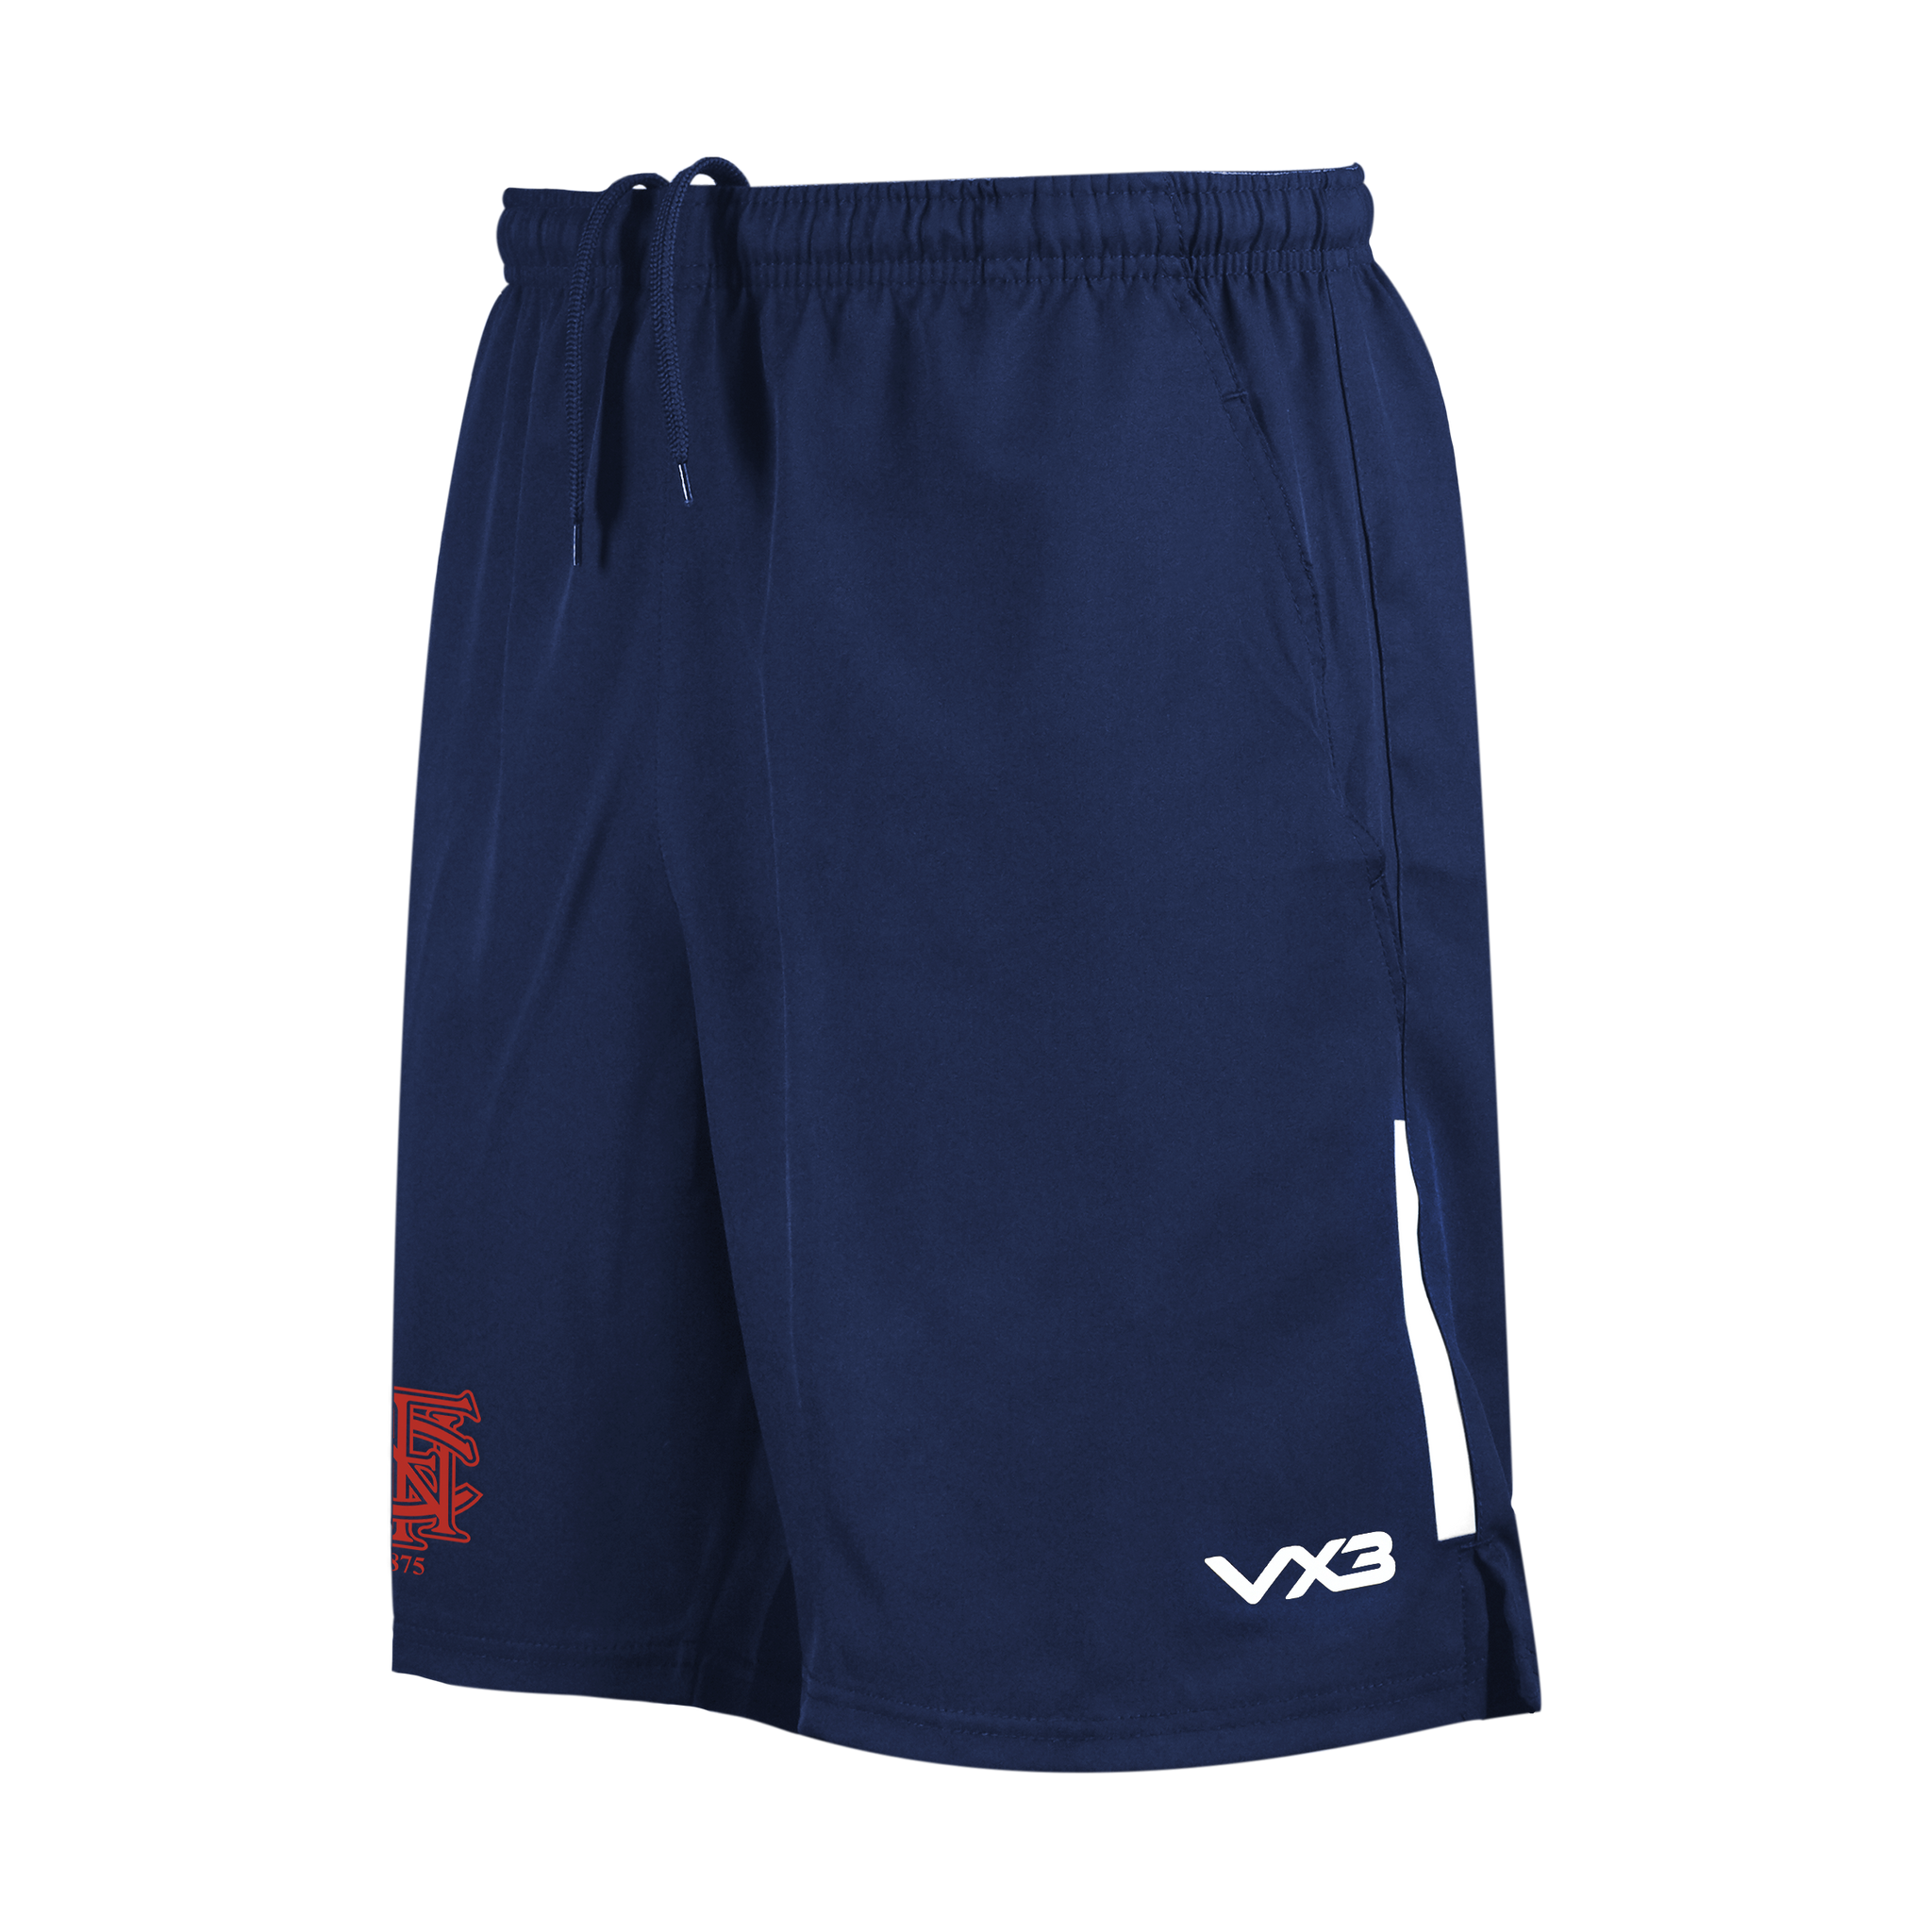 Northern Football Club Fortis Youth Travel Shorts